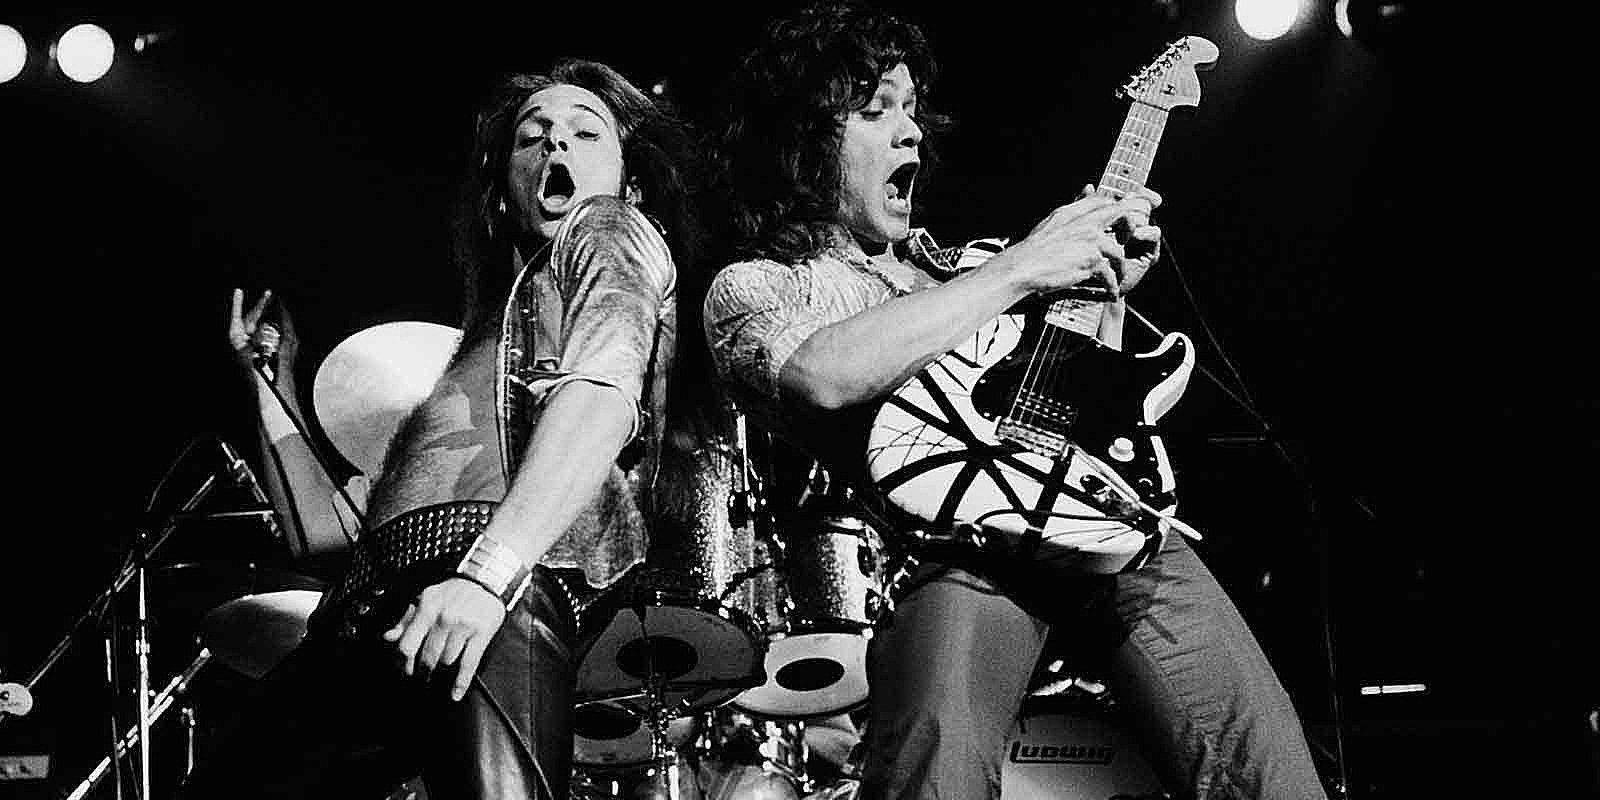 A black and white photo of David Lee Roth and Eddie Van Halen at a seventies concert